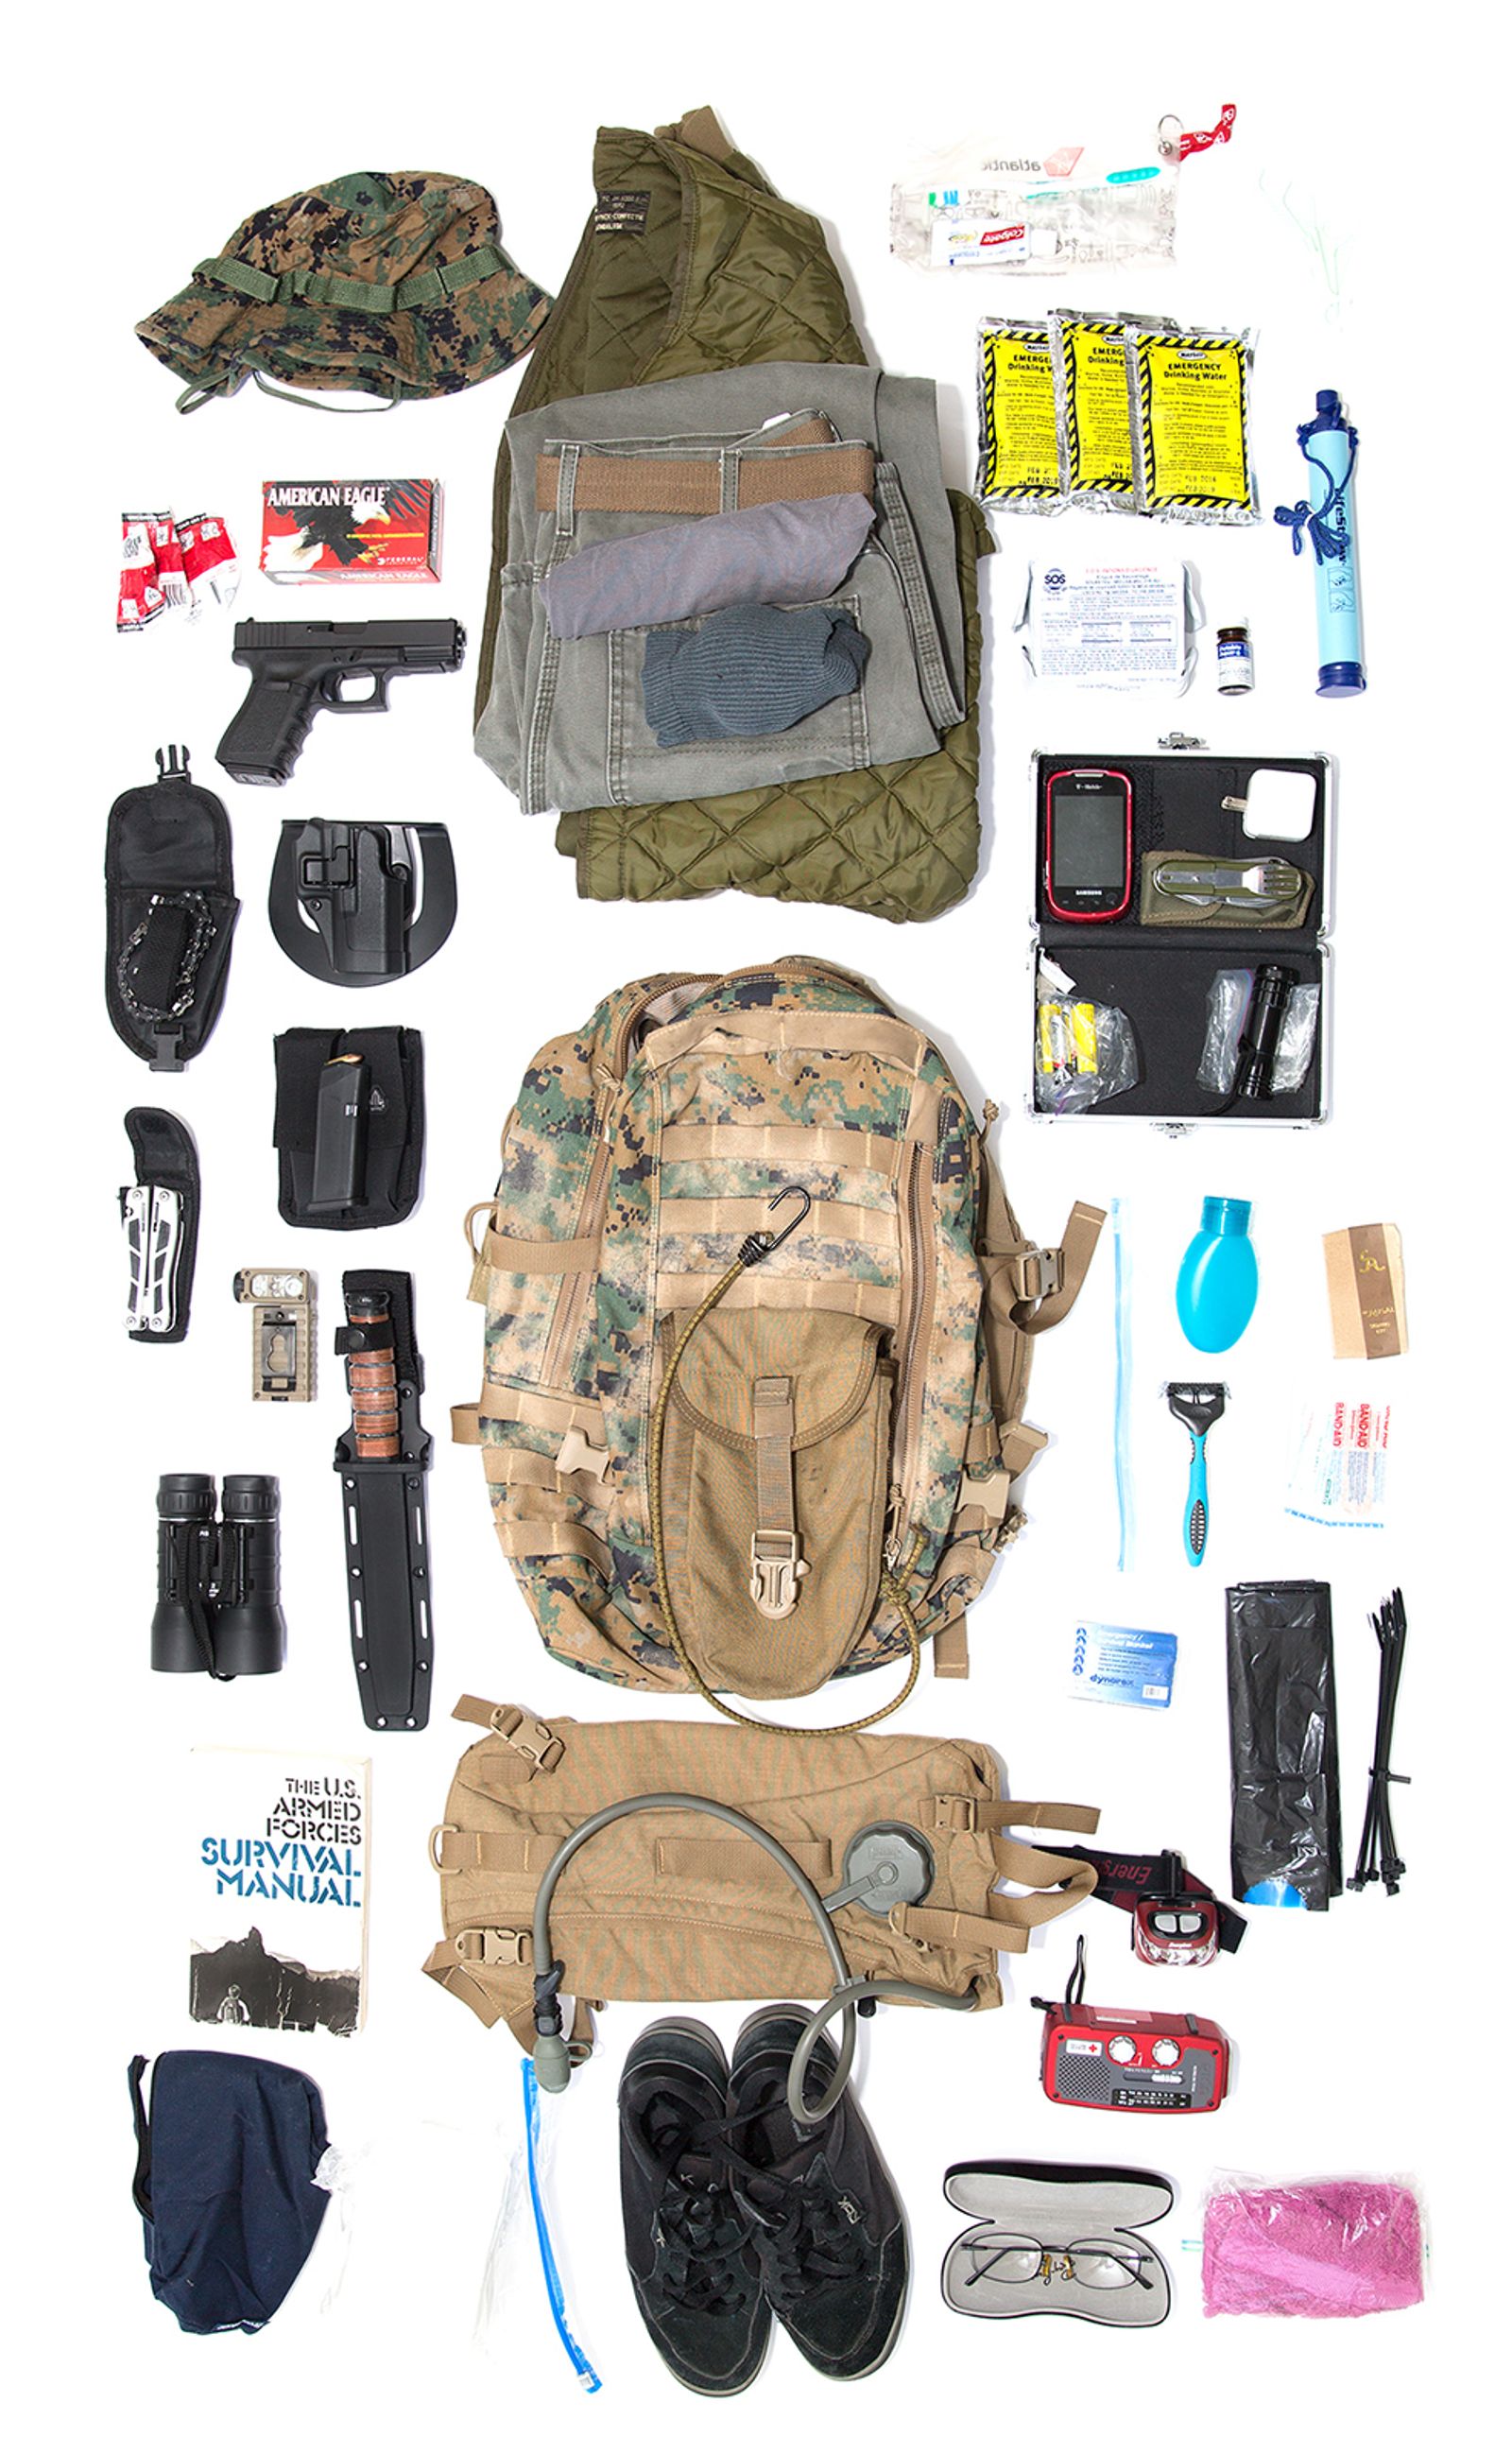 © Allison Stewart - Image from the Bug Out Bag: The Commodification of American Fear photography project